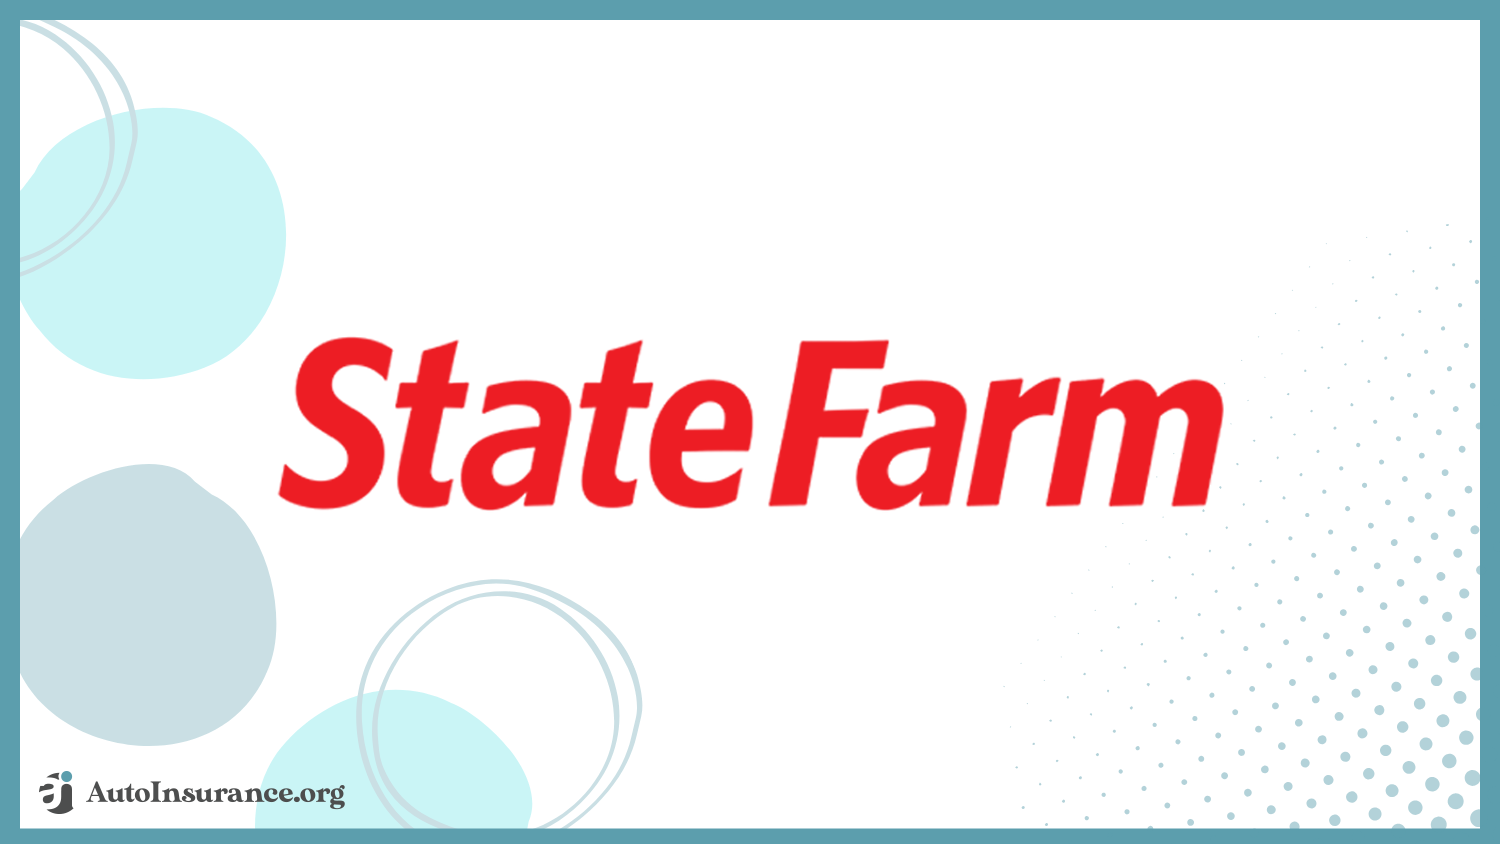 State Farm: Best Auto Insurance for Low-Income Drivers